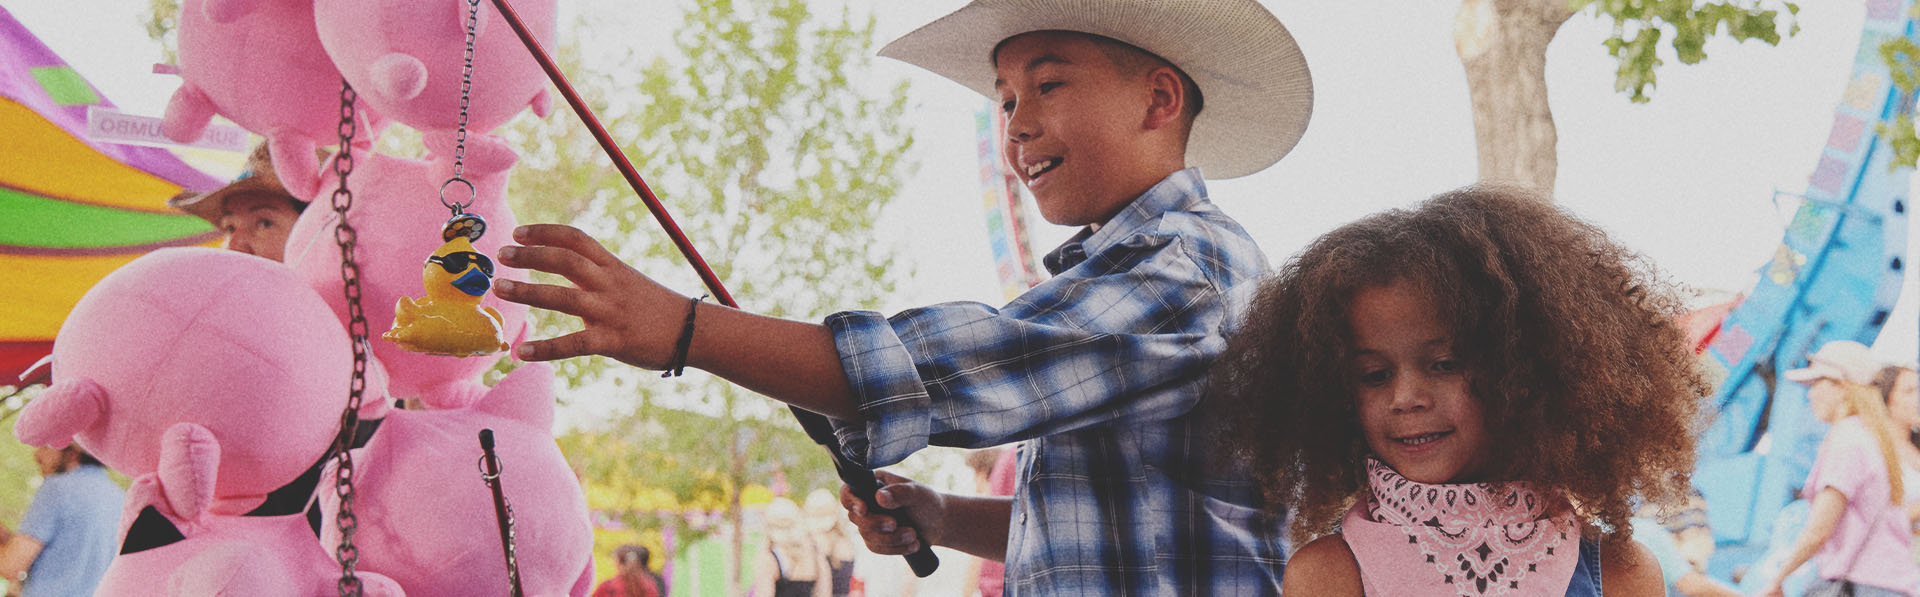 two children playing games at the Calgary Stampede Midway